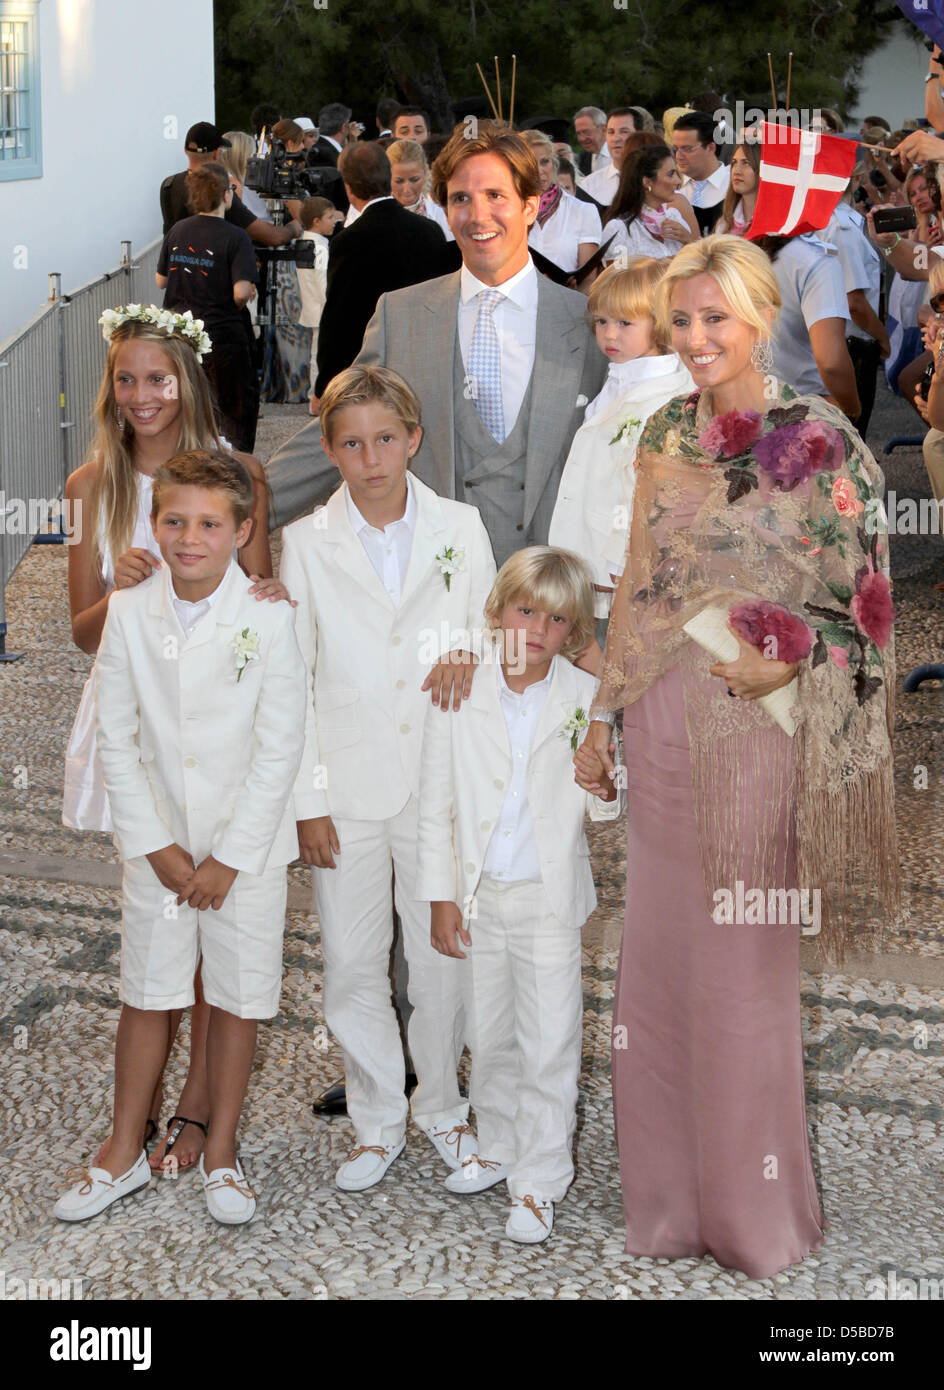 Crown Prince Pavlos of Greece and Crown Princess Marie-Chantal arrive with children, Princess Maria-Olympia (L), Prince Constantine Alexios (3rd L), Prince Achileas-Andreas (2-L), Prince Odysseas-Kimon (C) and Prince Aristide Stavros (2-R) at the Agios Nikolaos church for the wedding ceremony of Nikolaos, son of the former Greek king, and his bride Tatiana Blatnik on Spetses Island Stock Photo